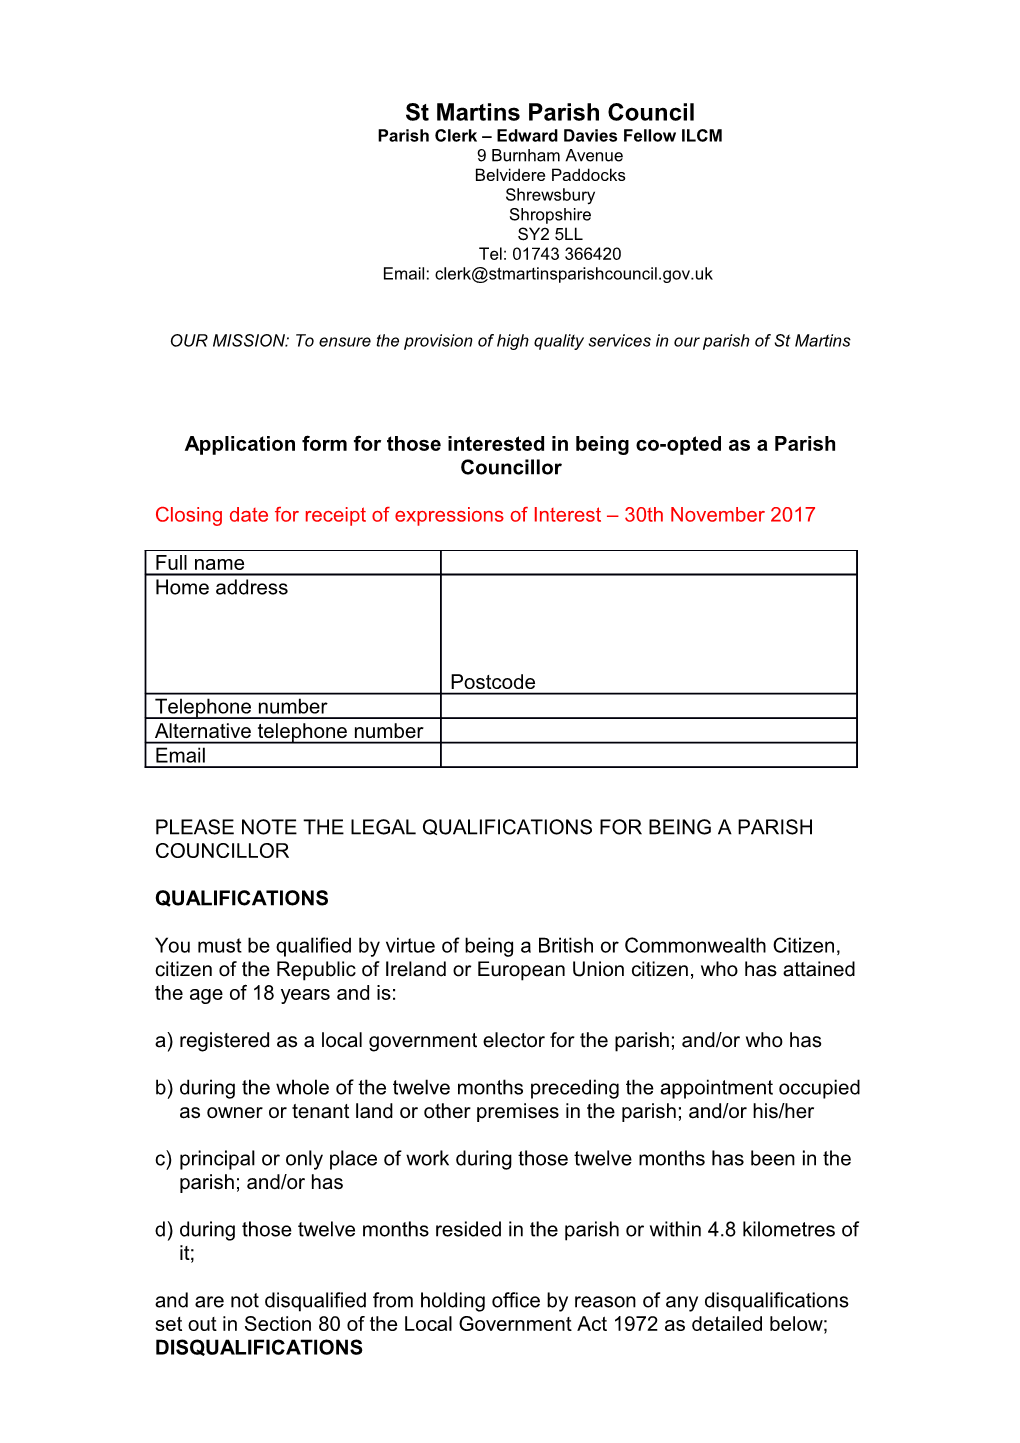 Application Form for Those Interested in Being Co-Opted As a Parish Councillor